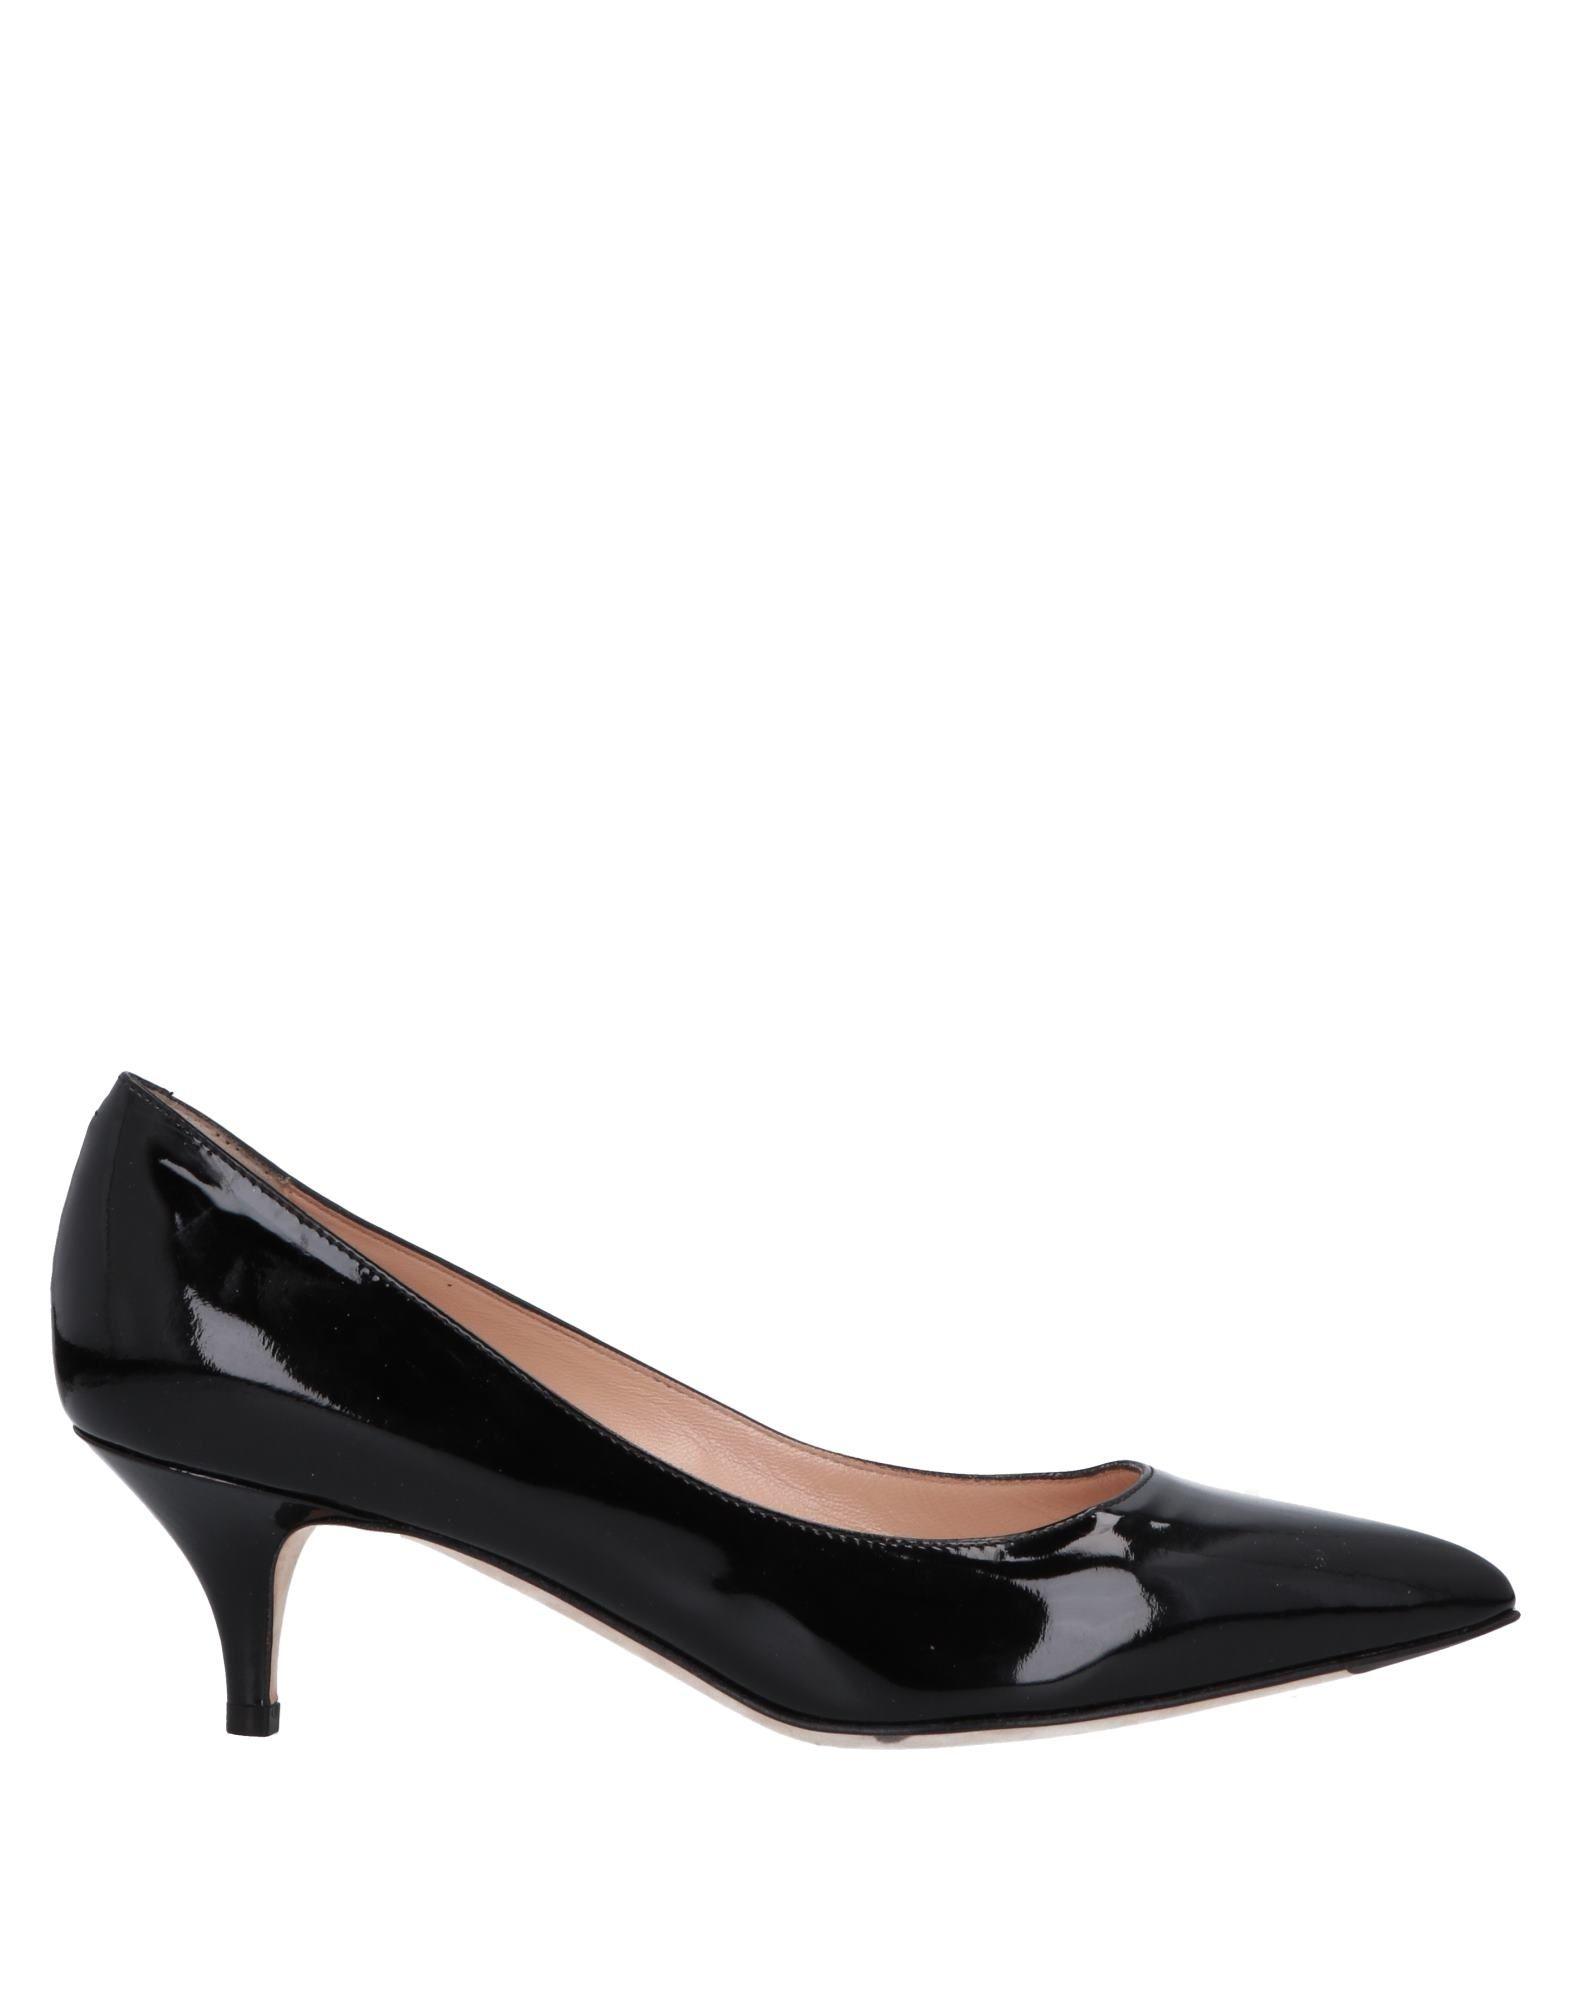 Bally Leather Pump in Black - Lyst